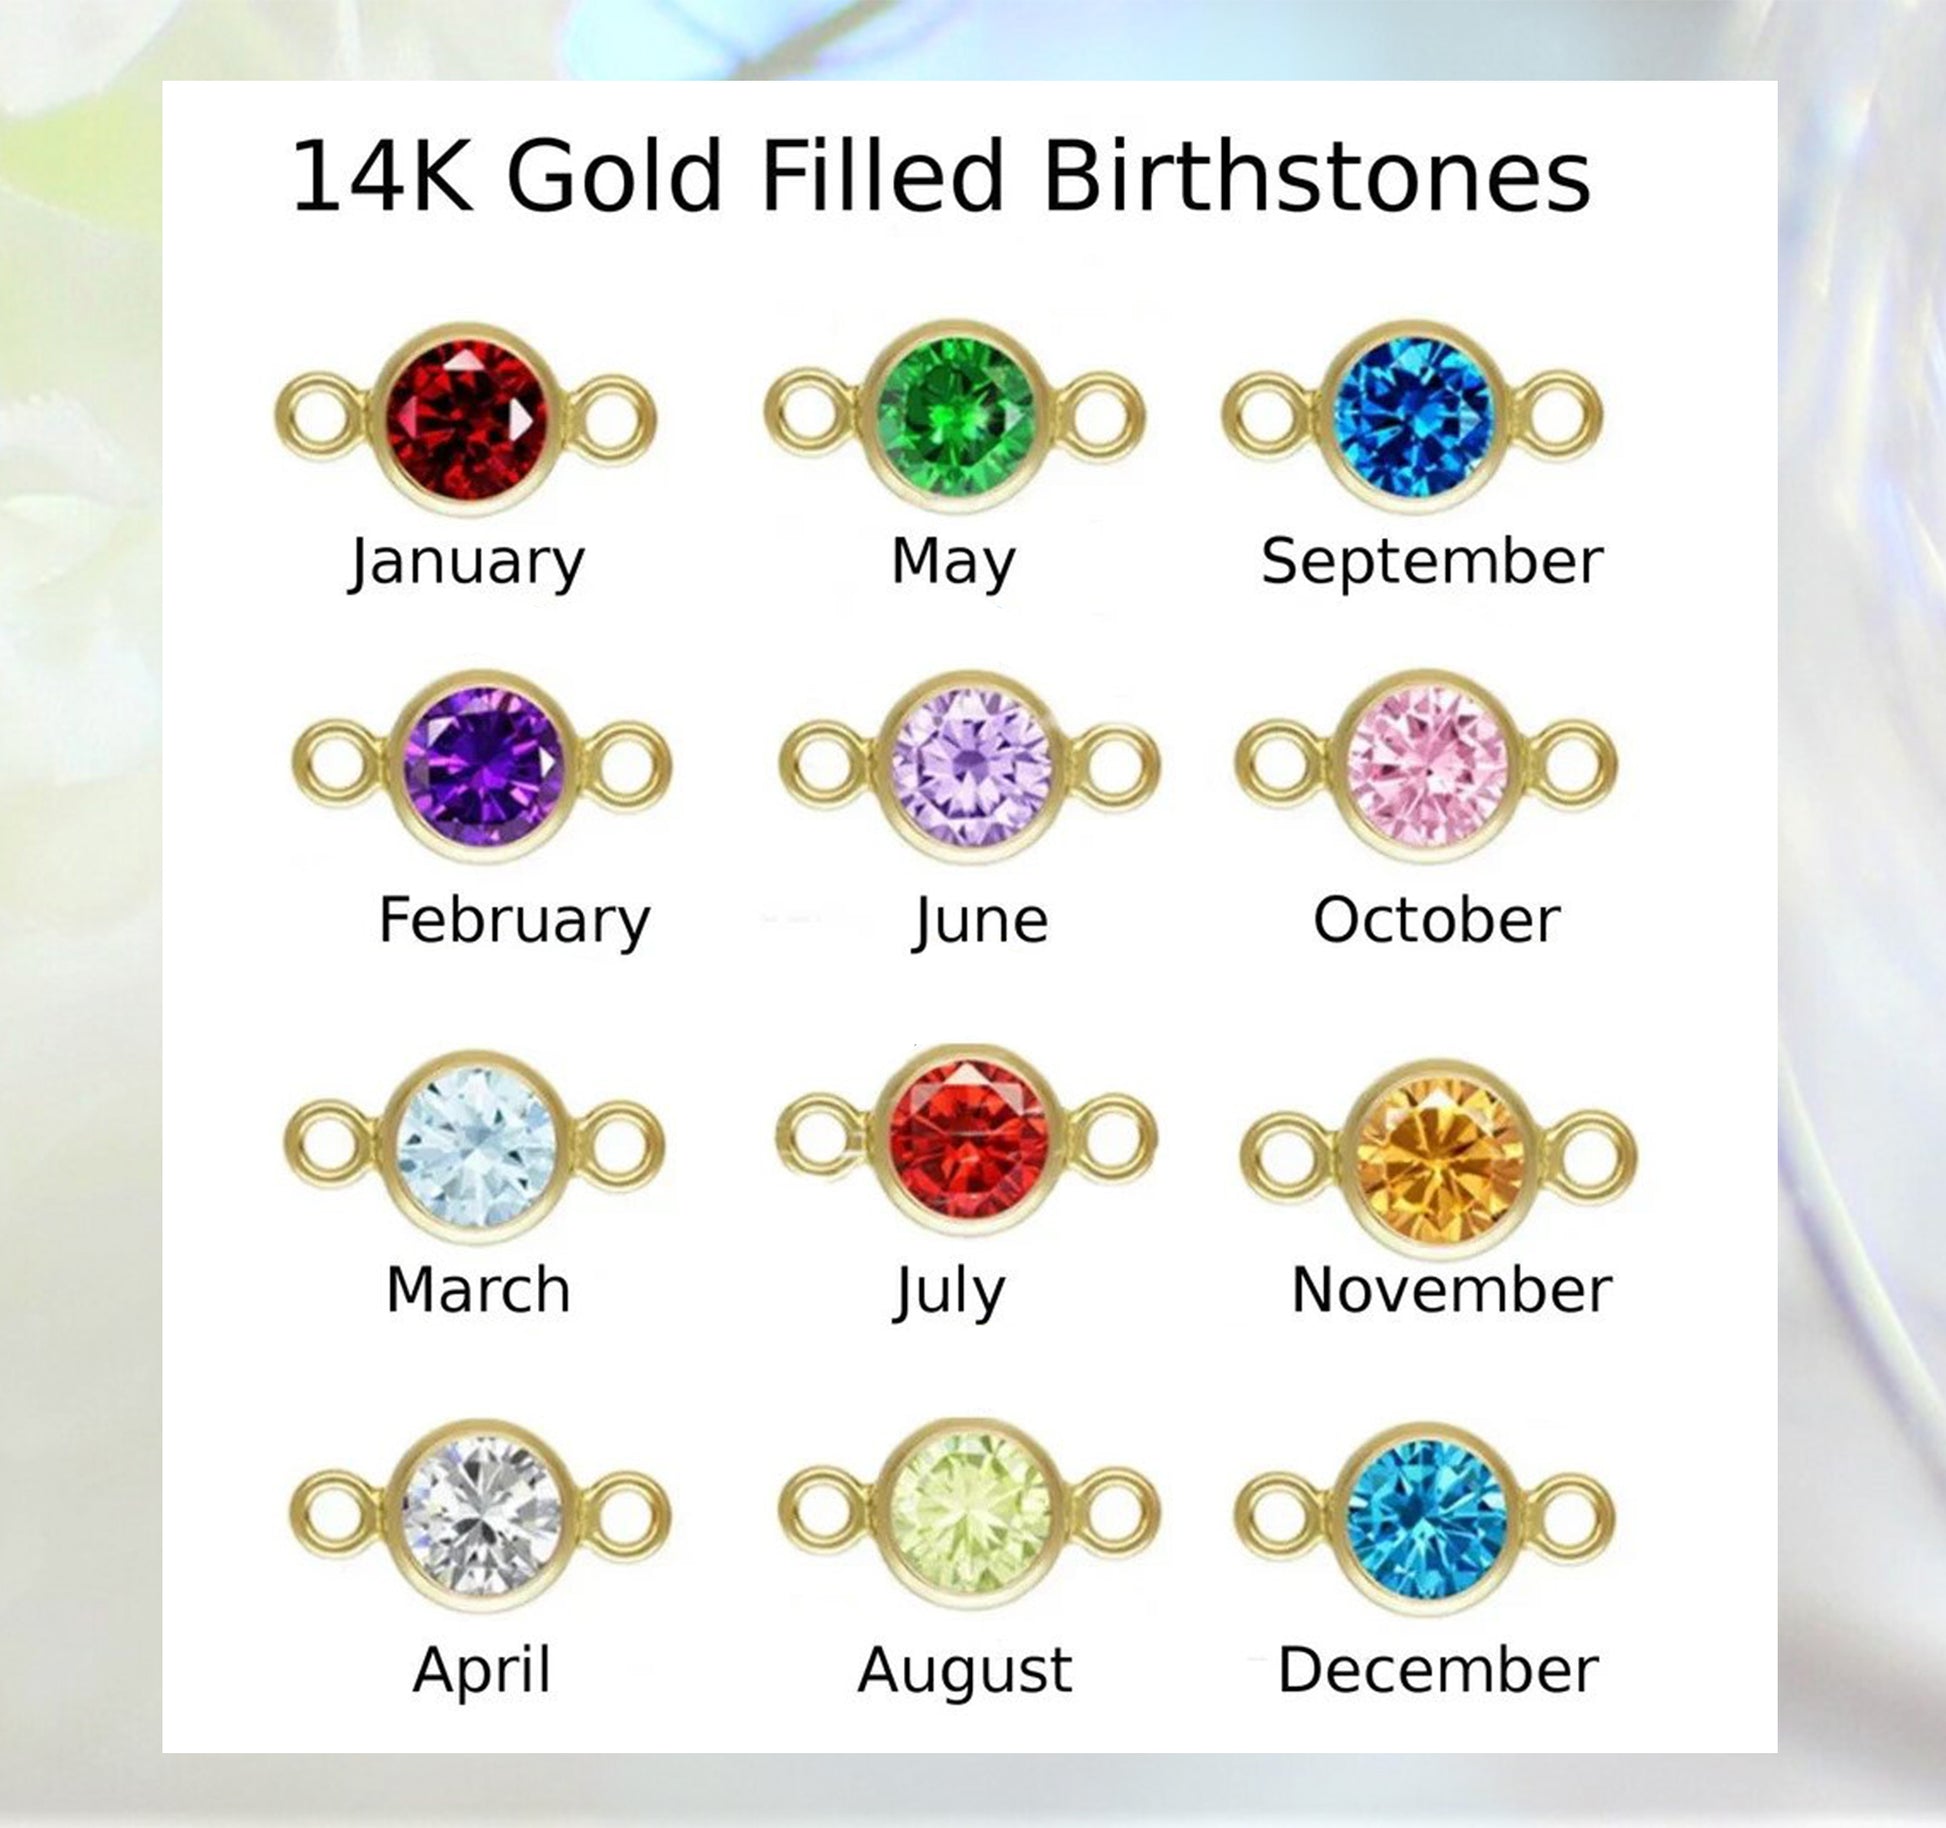 Gold filled birthstone charm options and their corresponding months that are available for Gilded Sapphire's custom jewelry are displayed against a plain white background with a decorative border.